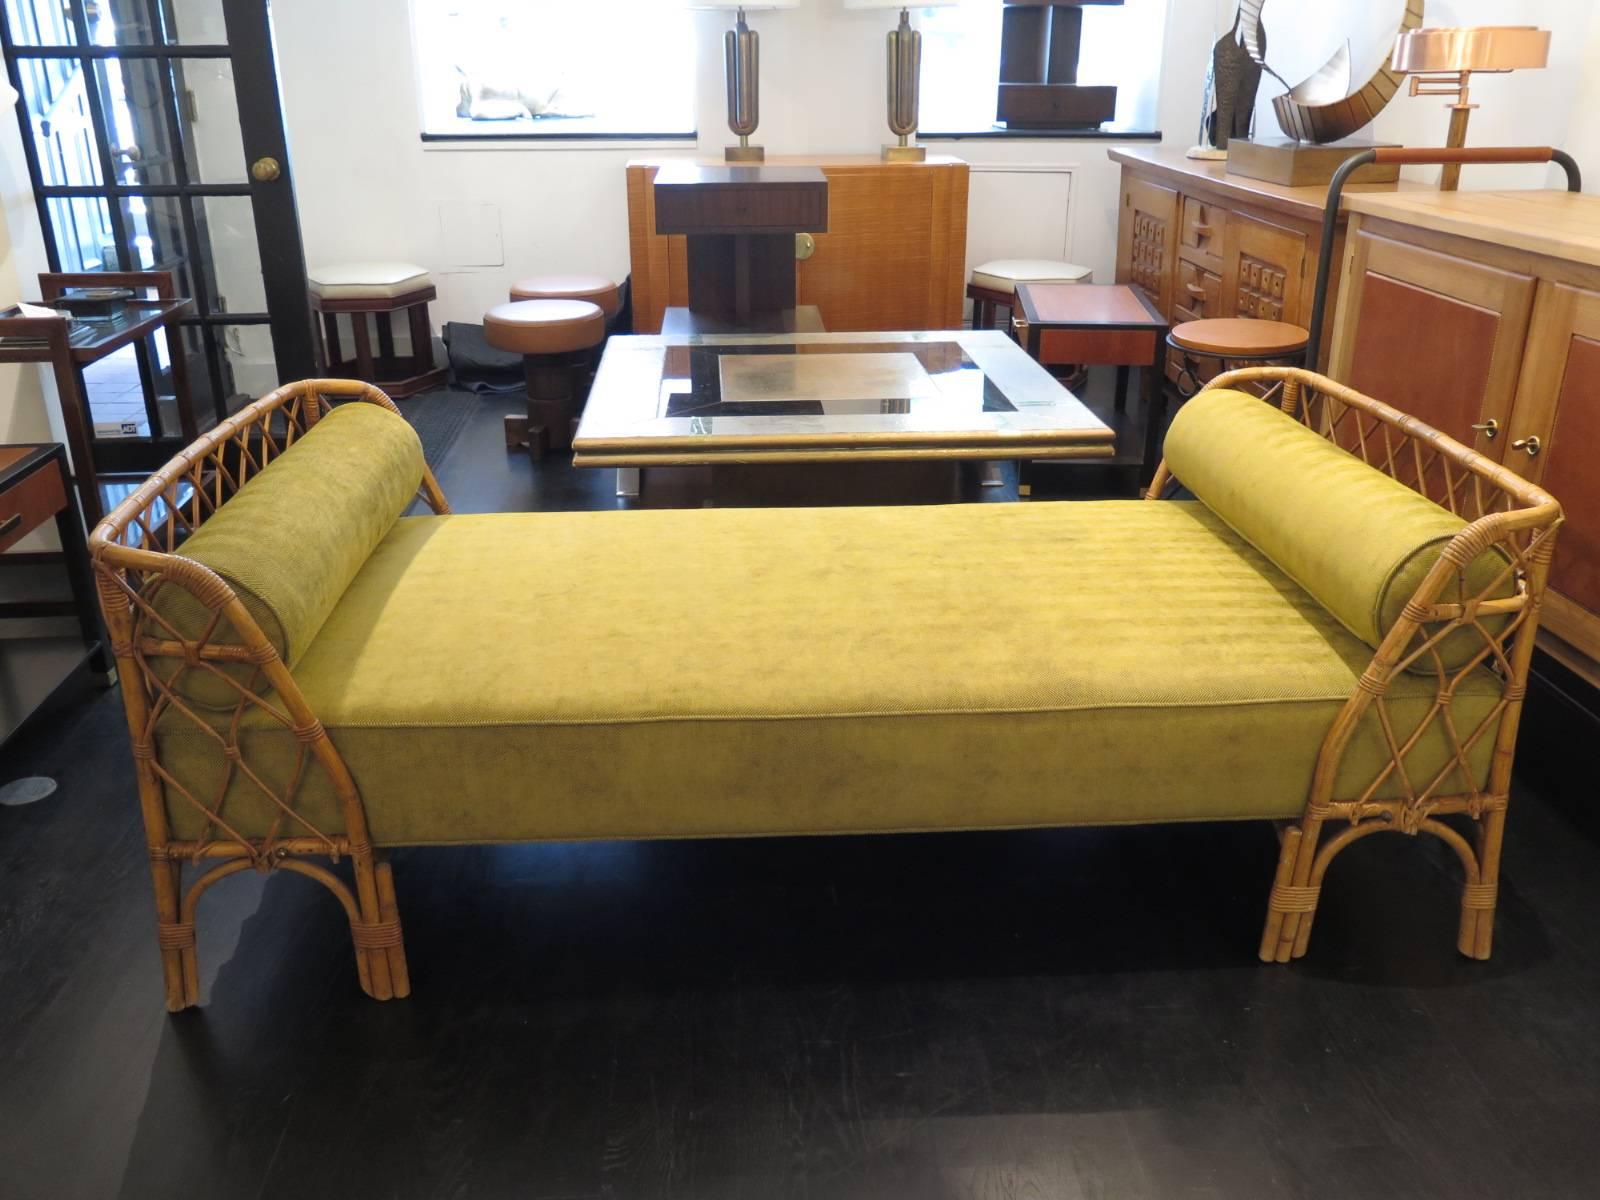 Rattan daybed by Louis Sognot with new upholstery. Original finish with
brass hardware. Beautiful scale and design.